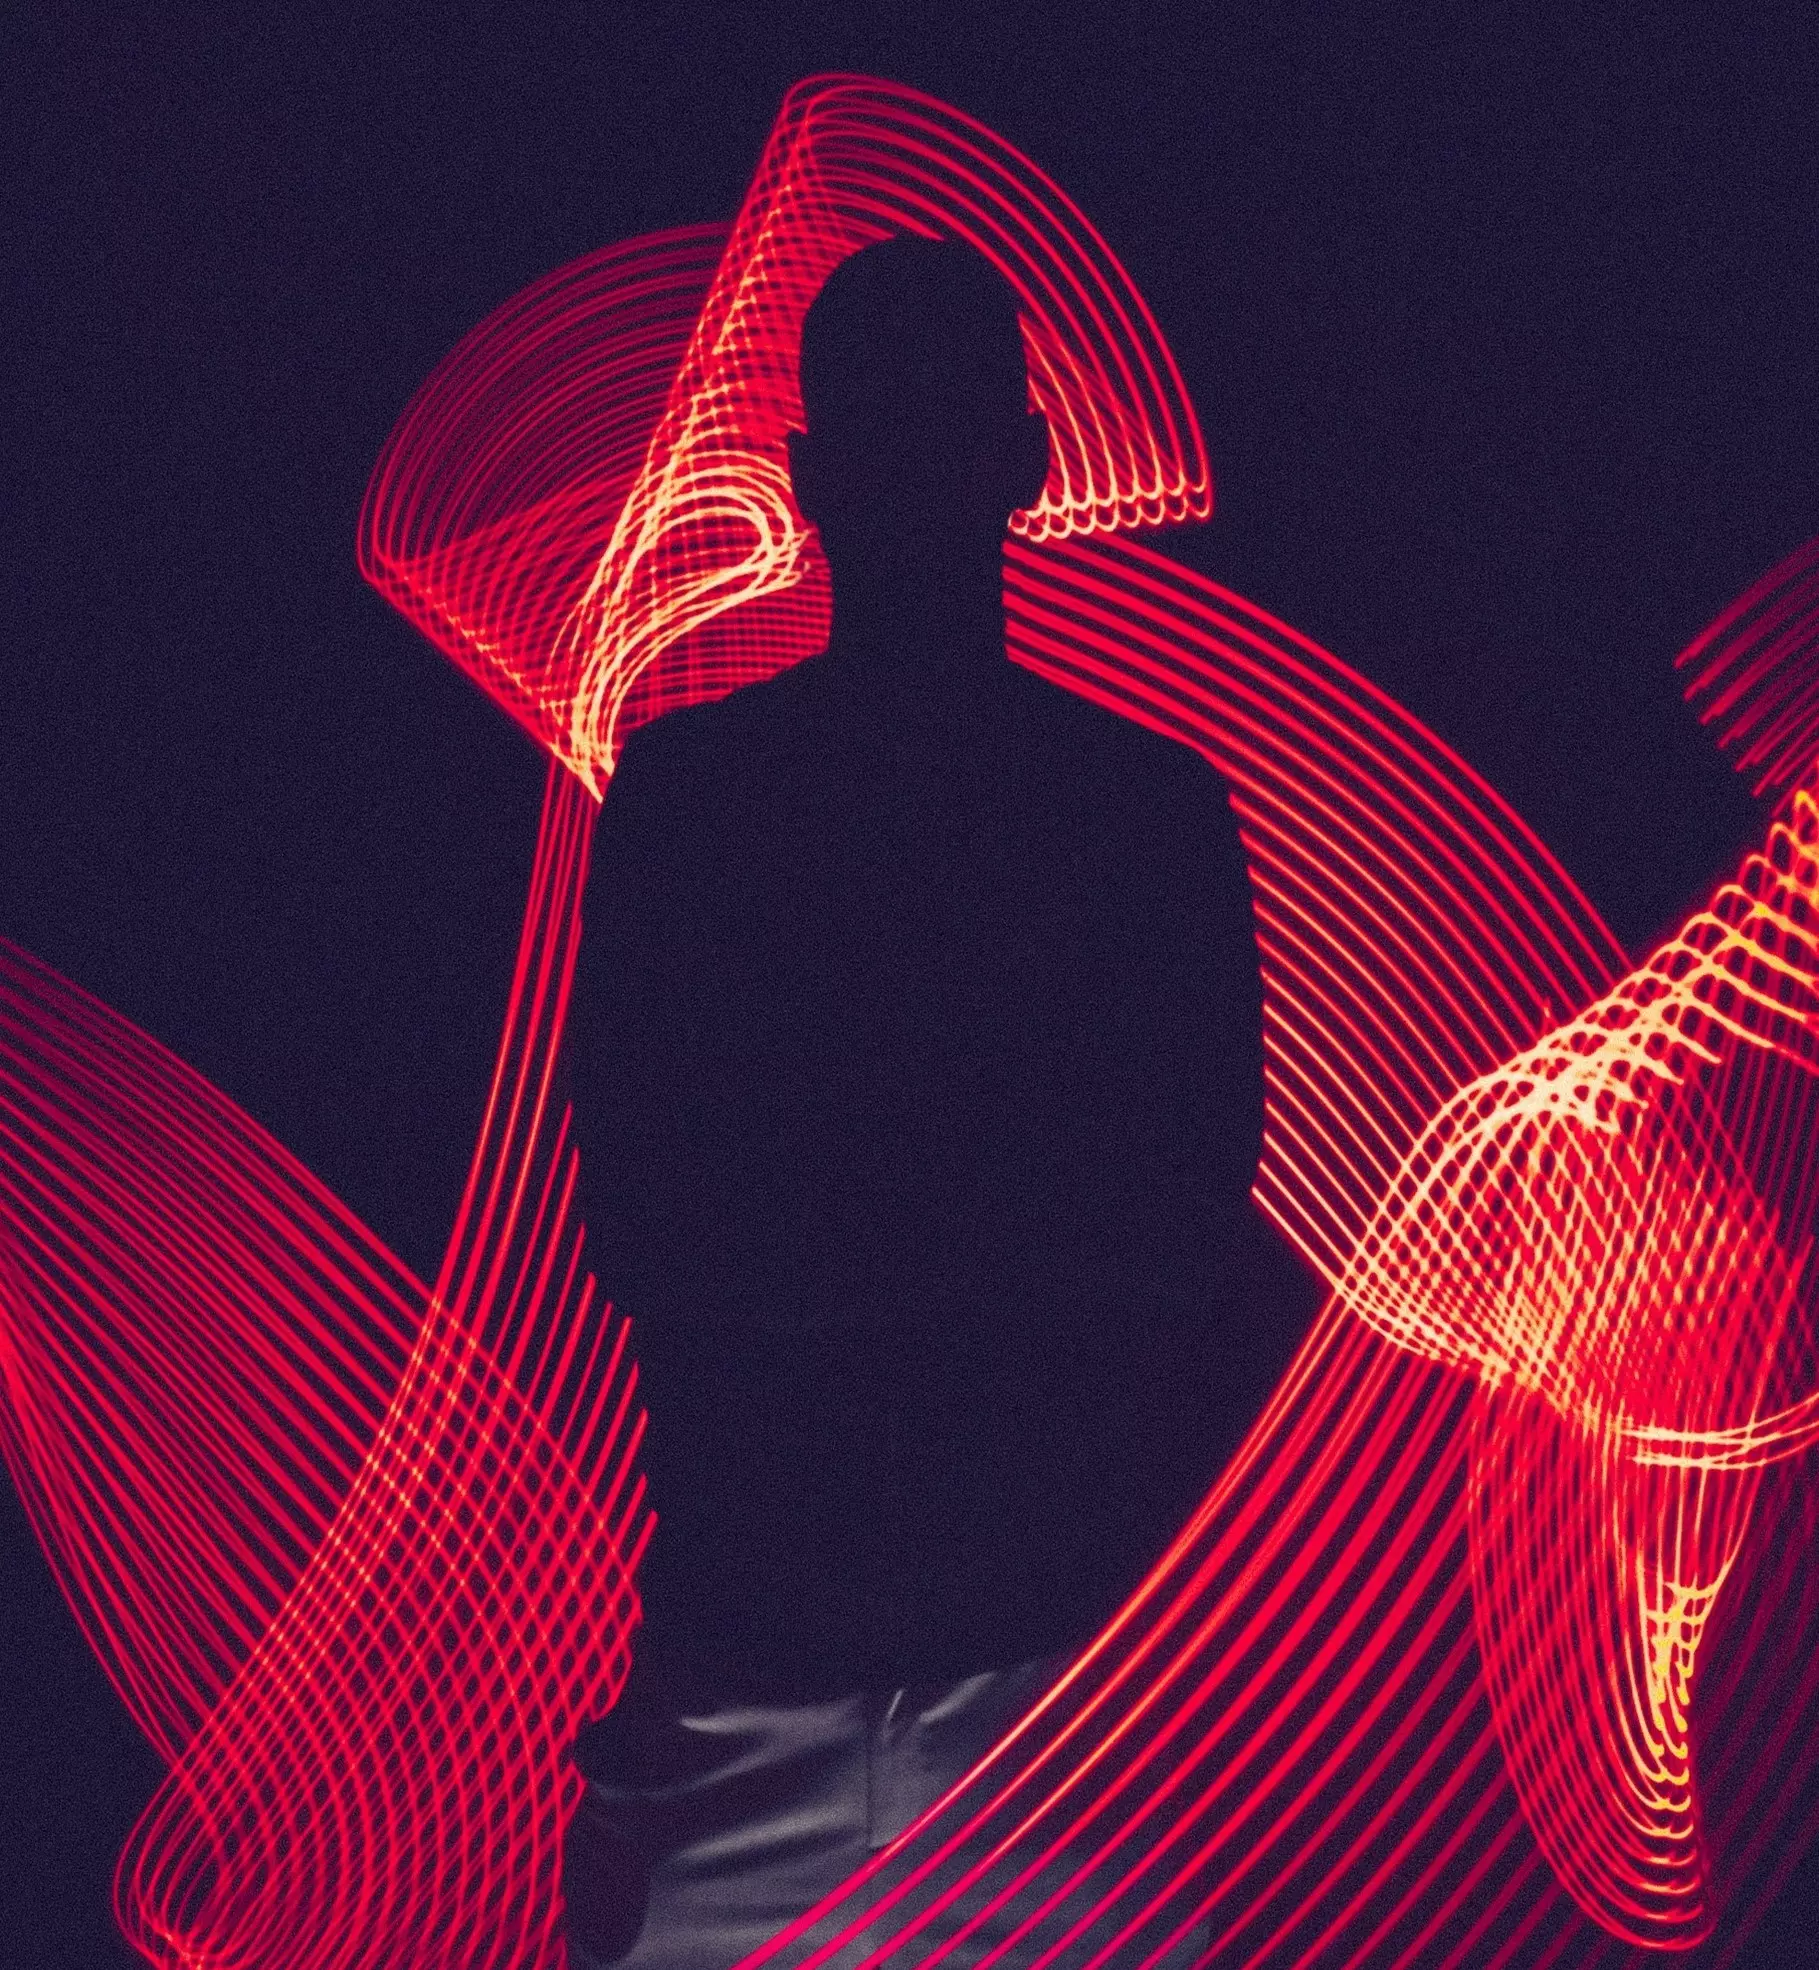 Silhouette of a man against glowing light trails